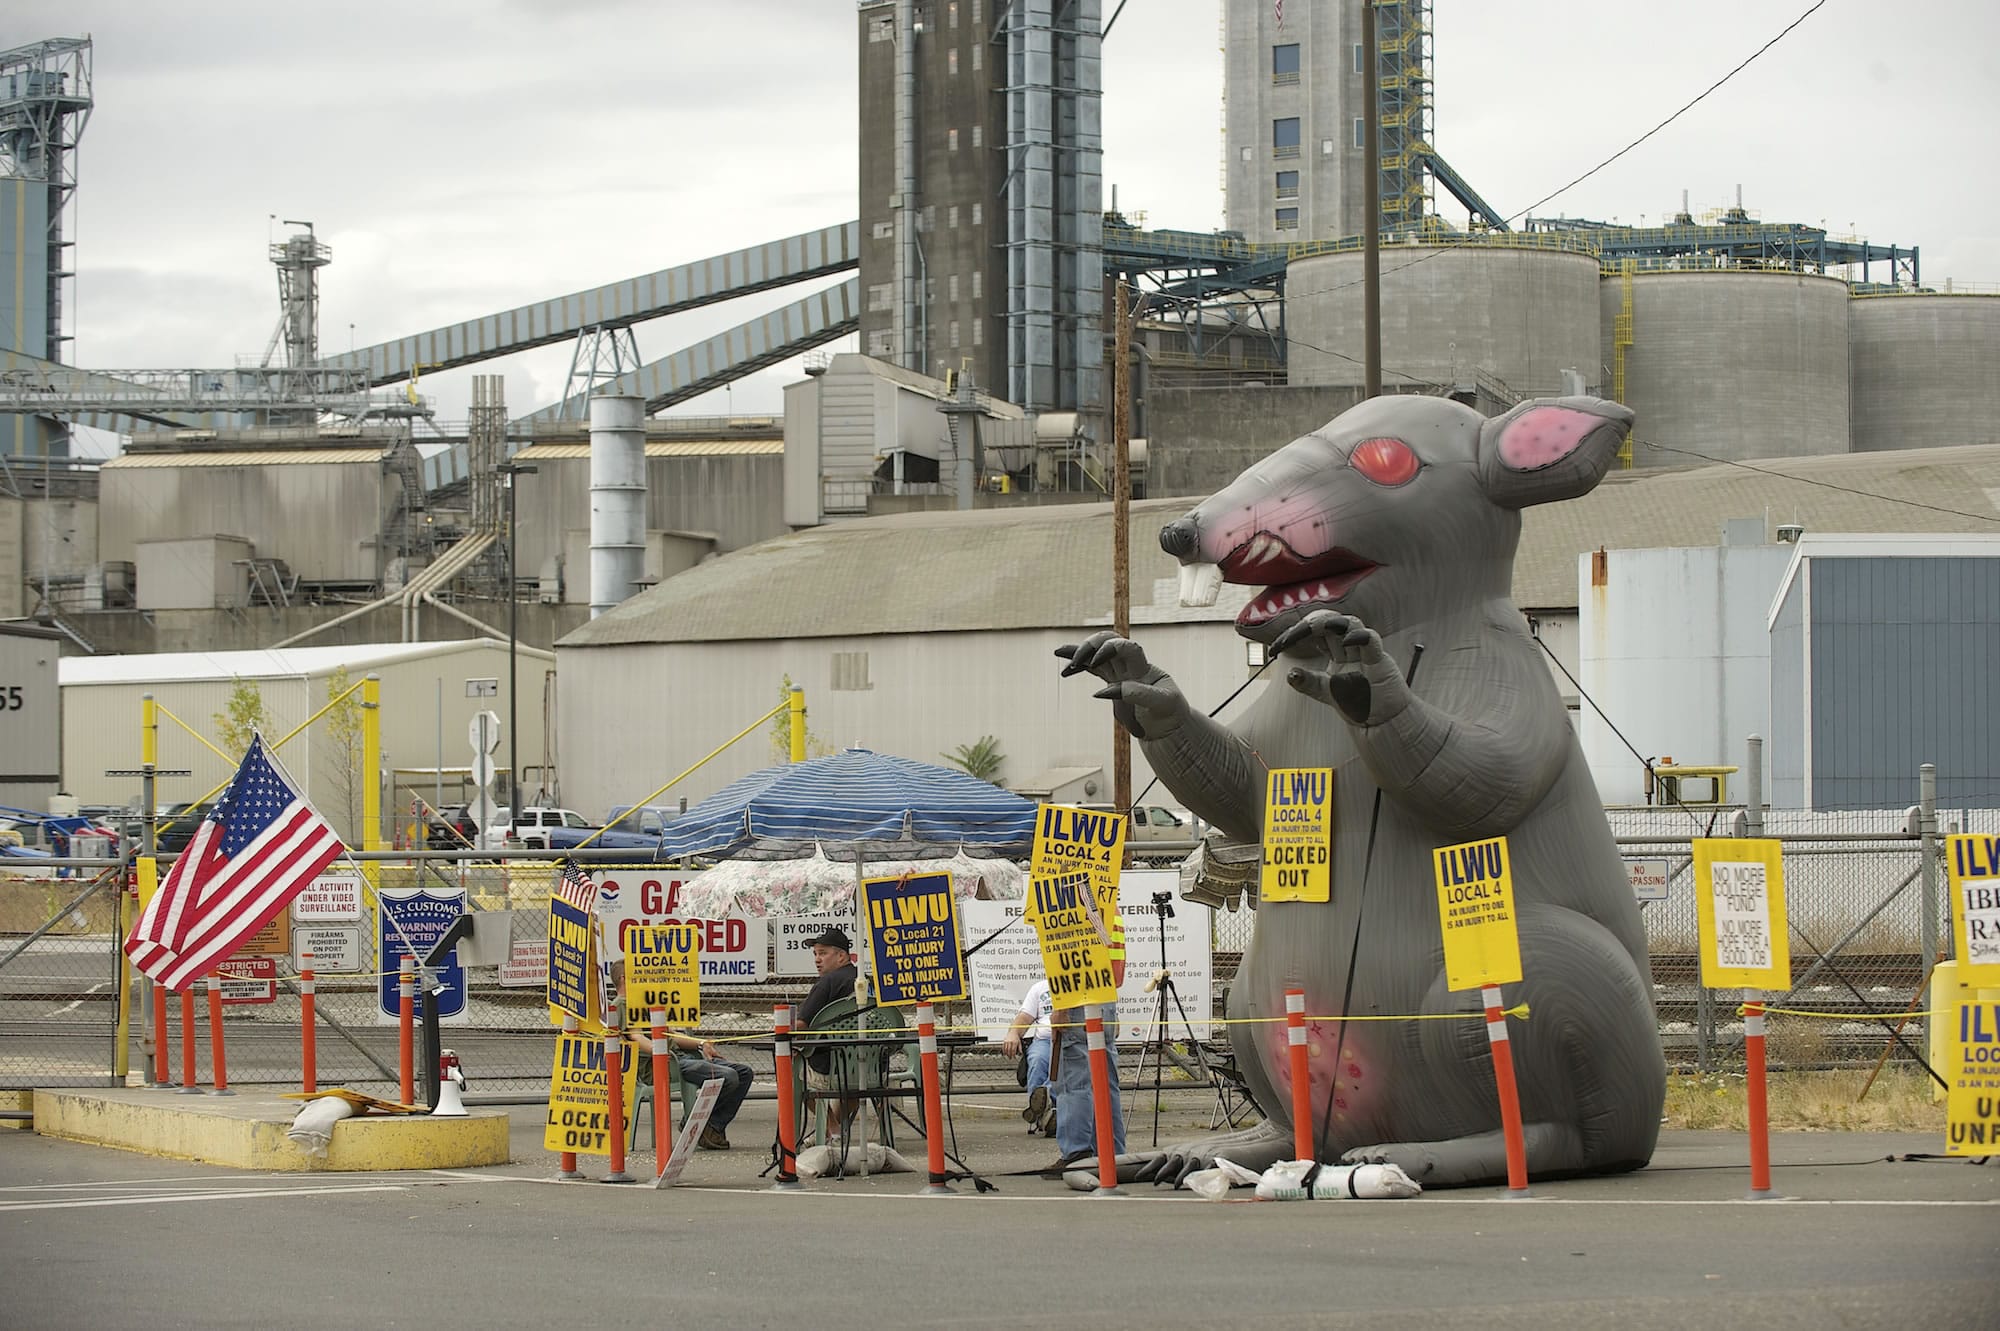 An inflatable rat joins the picket line with locked-out ILWU workers at the United Grain Corp.